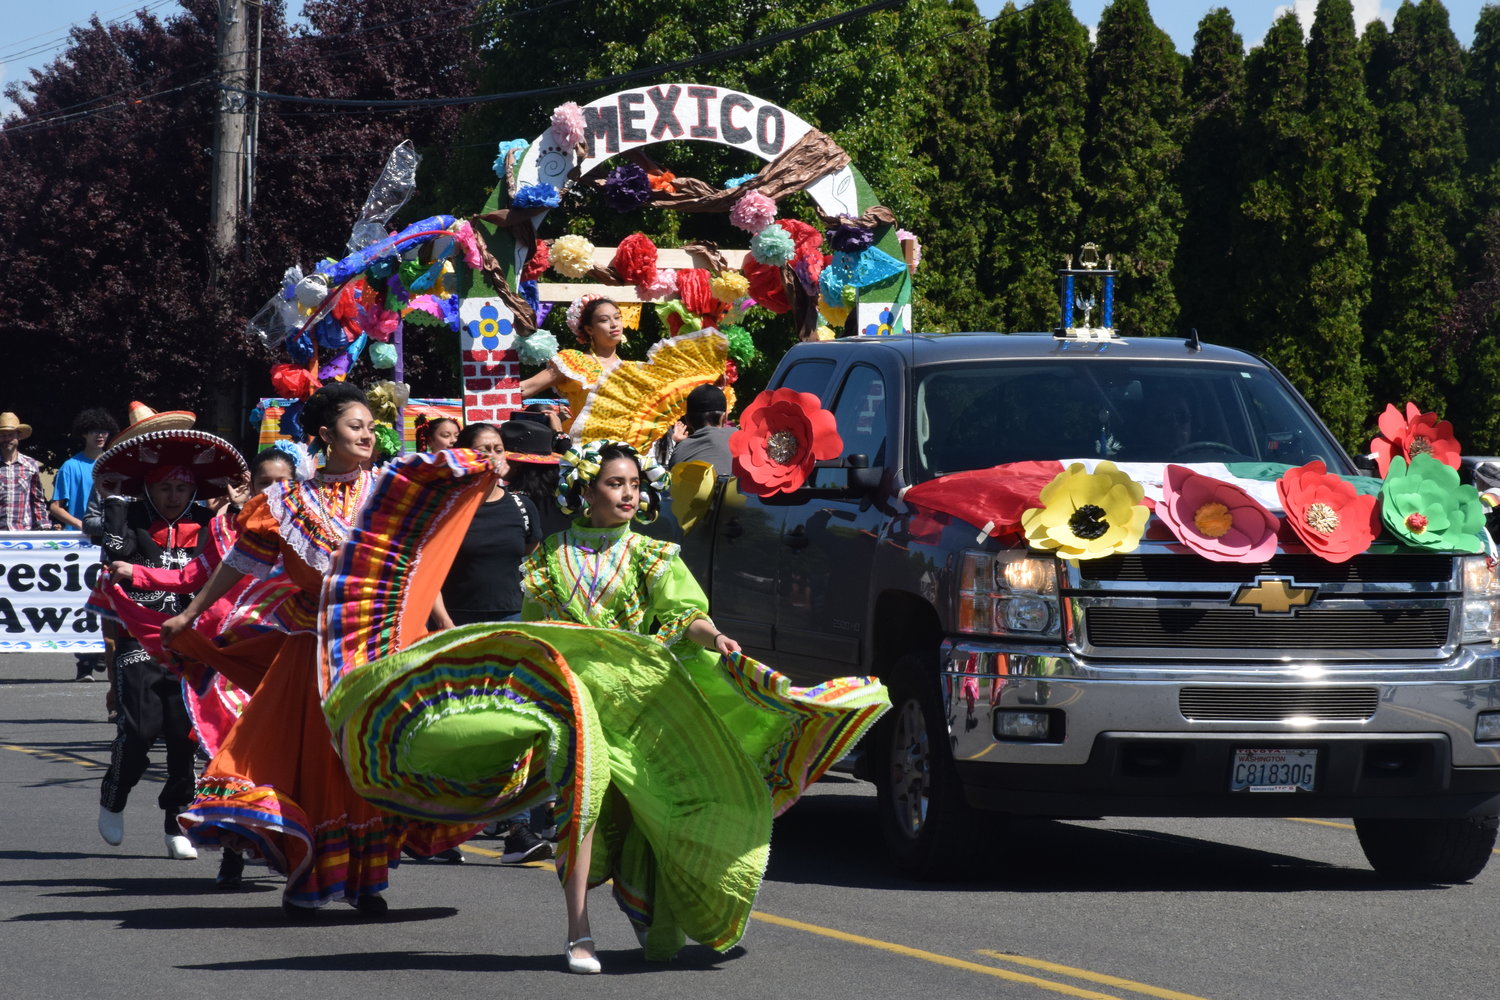 Vancouver Ballet Folklorico dancers take part in the Parade of Bands on May 21.